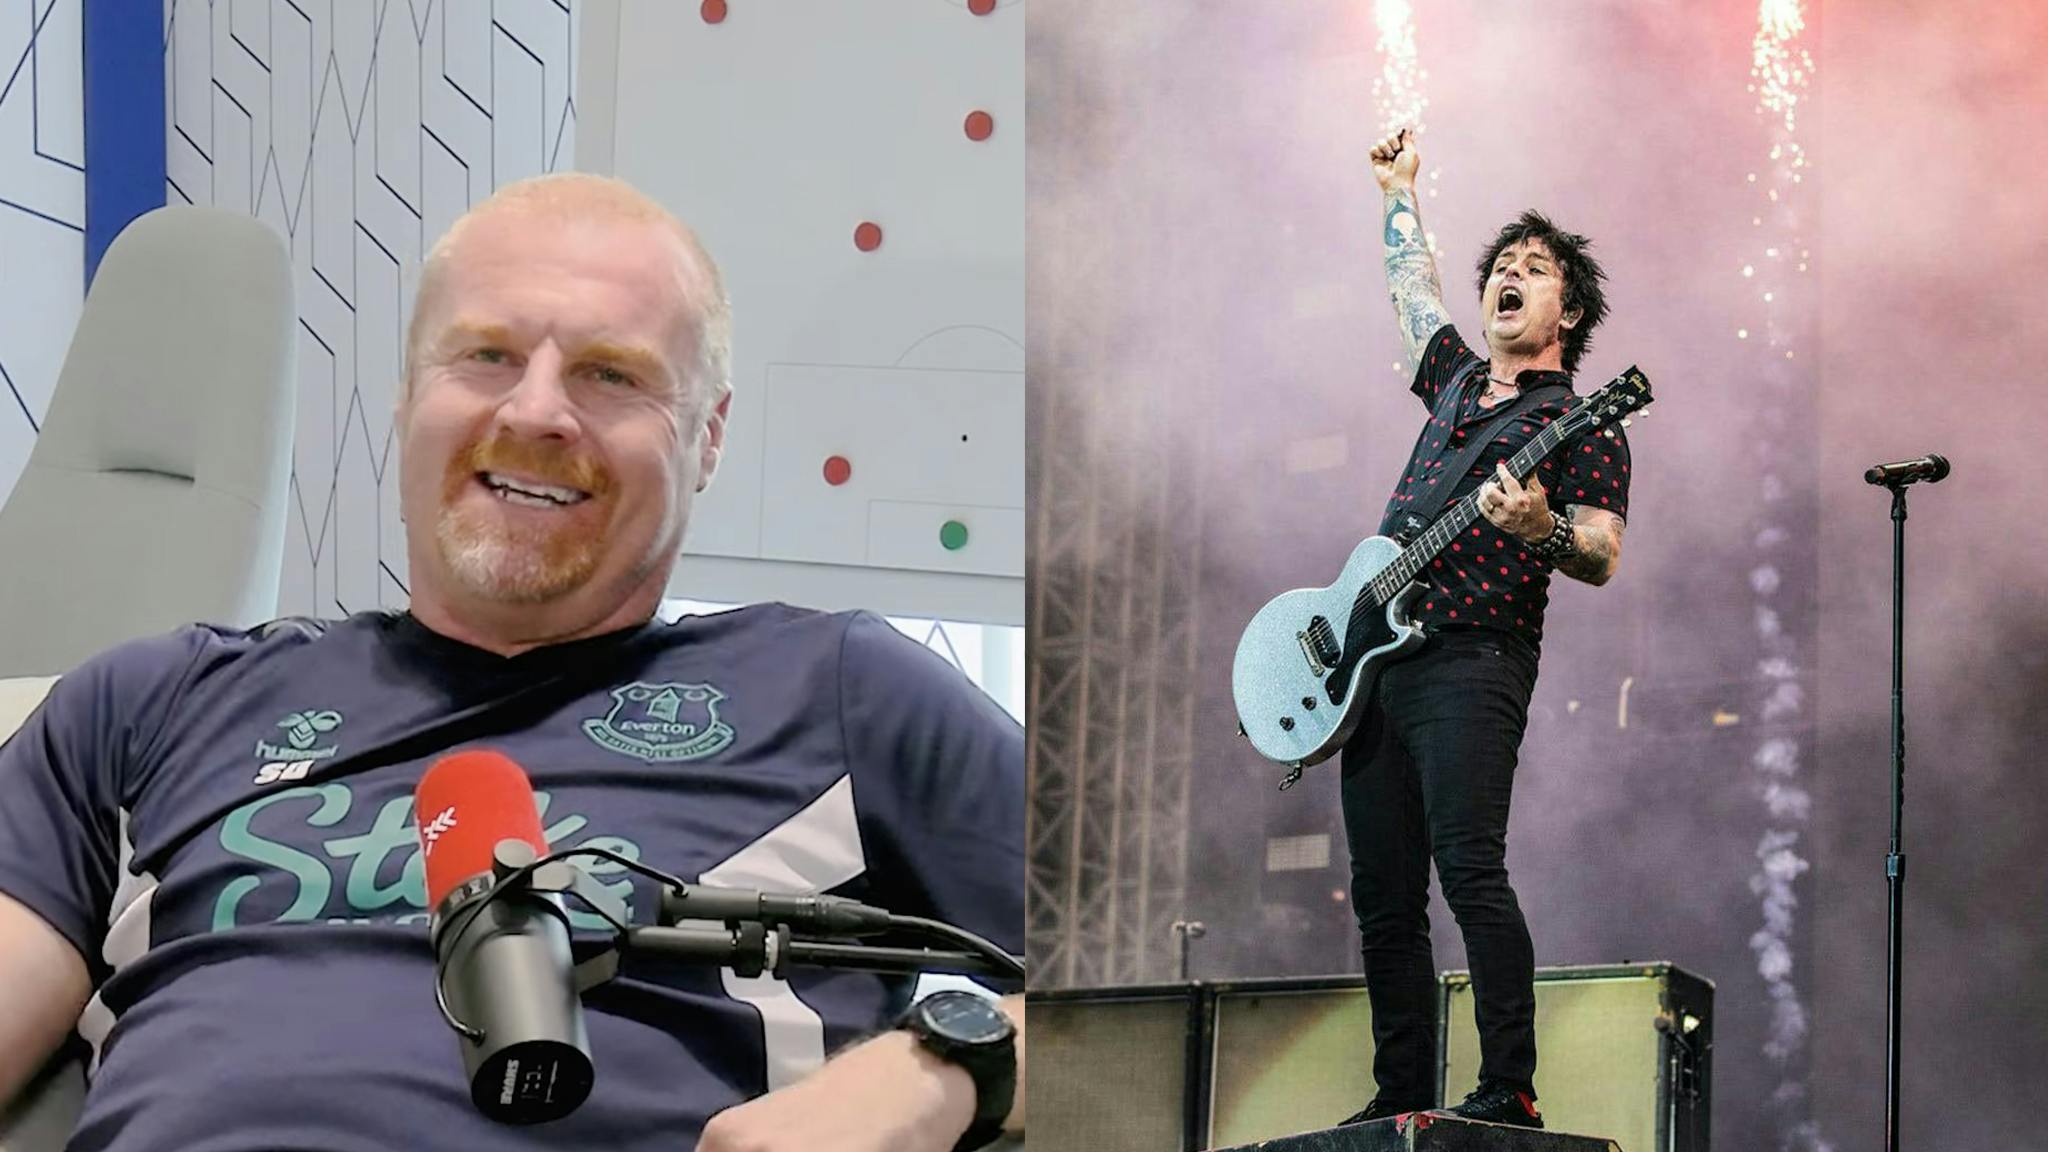 Everton manager Sean Dyche says everyone should see Green Day: “I don’t care what music you’re into, just buy a ticket”